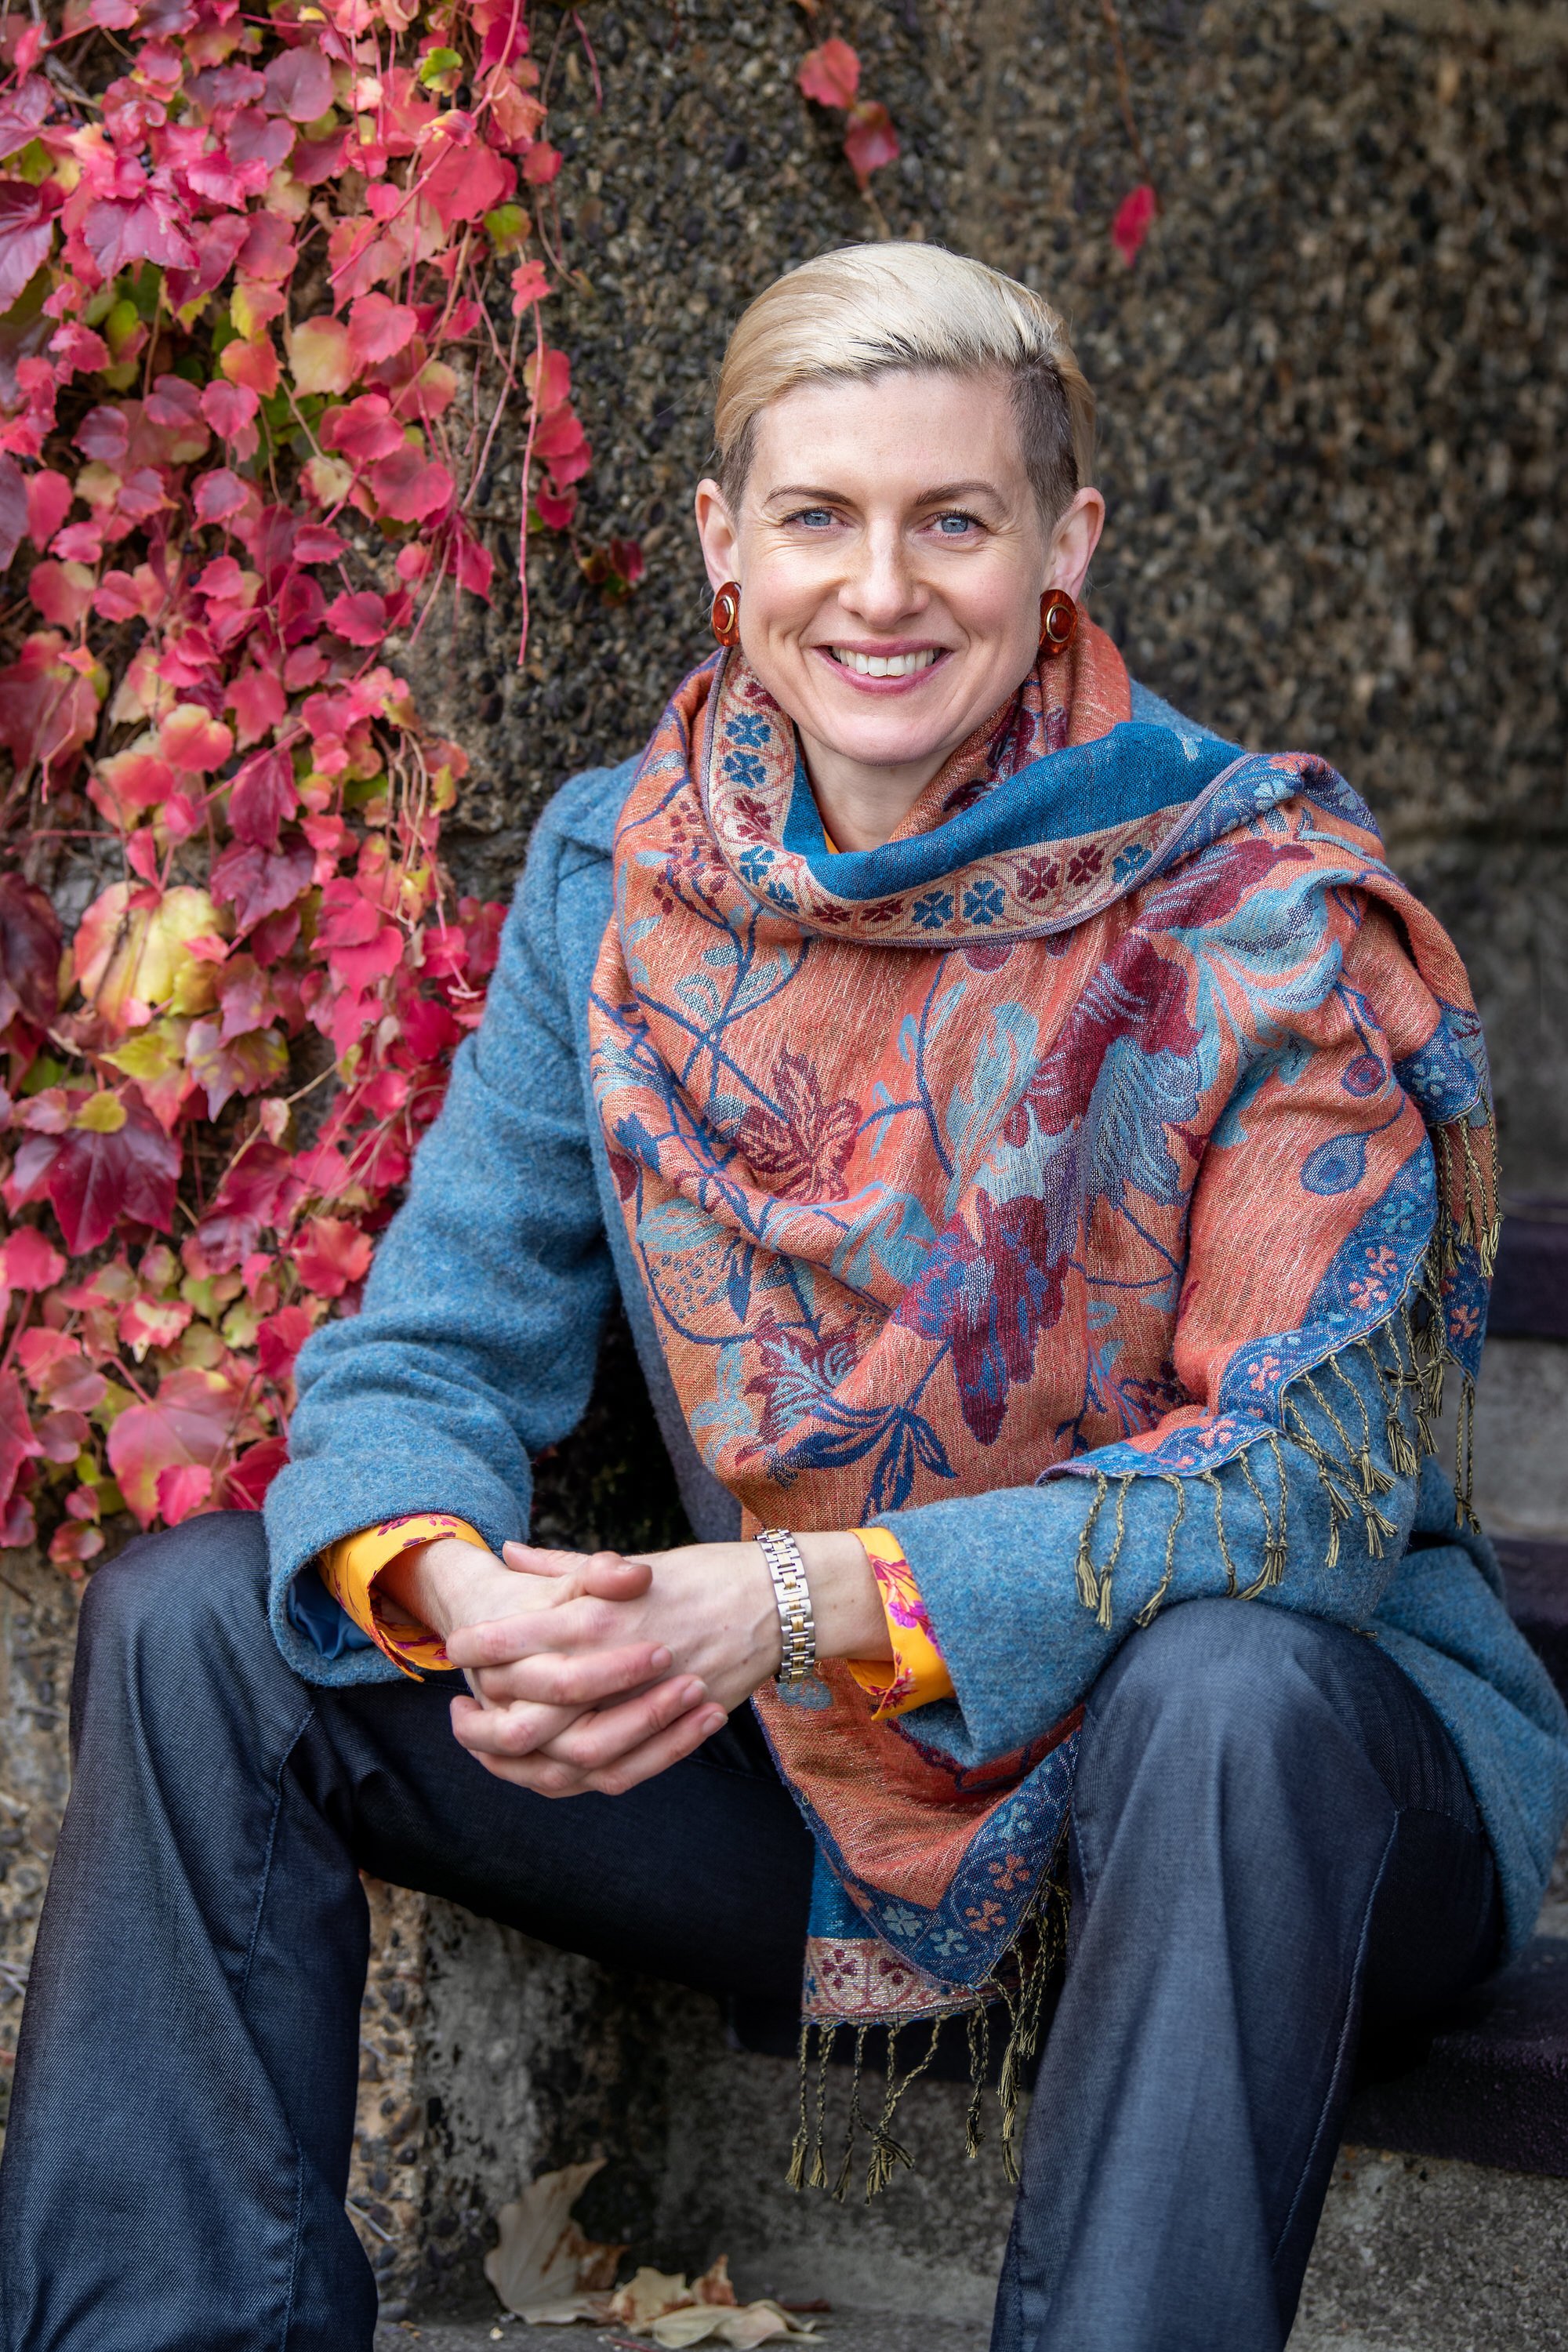  Therapist sitting on steps in winter coat with colourful scarf against an autumnal leafy backdrop. 